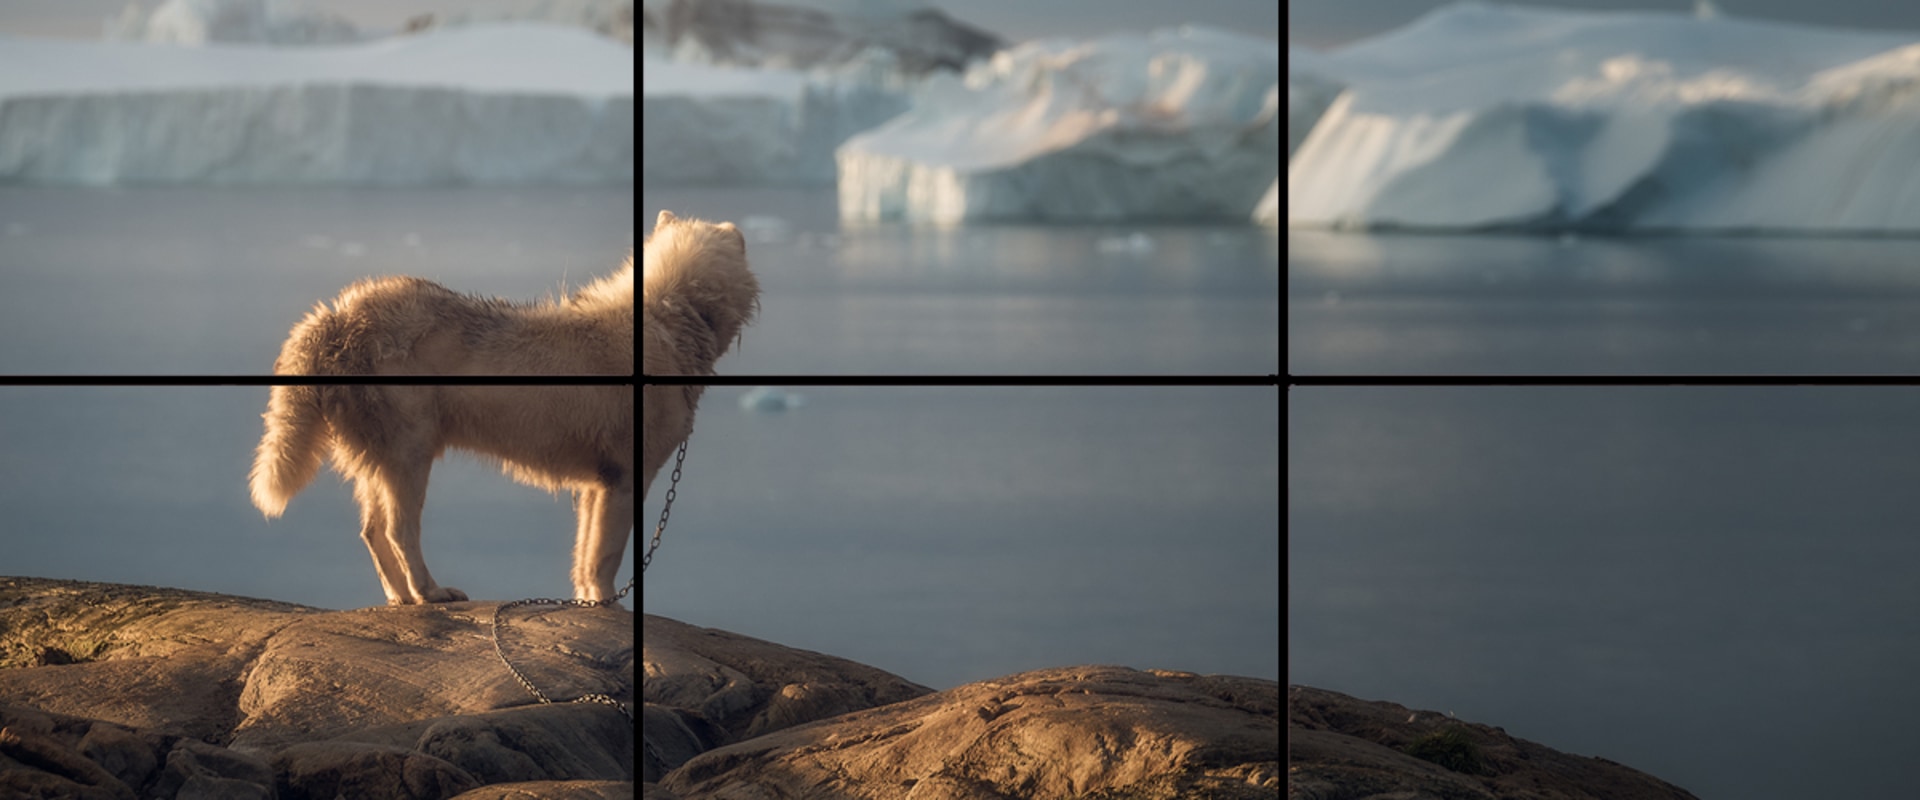 Understanding the Rule of Thirds for Photography Composition